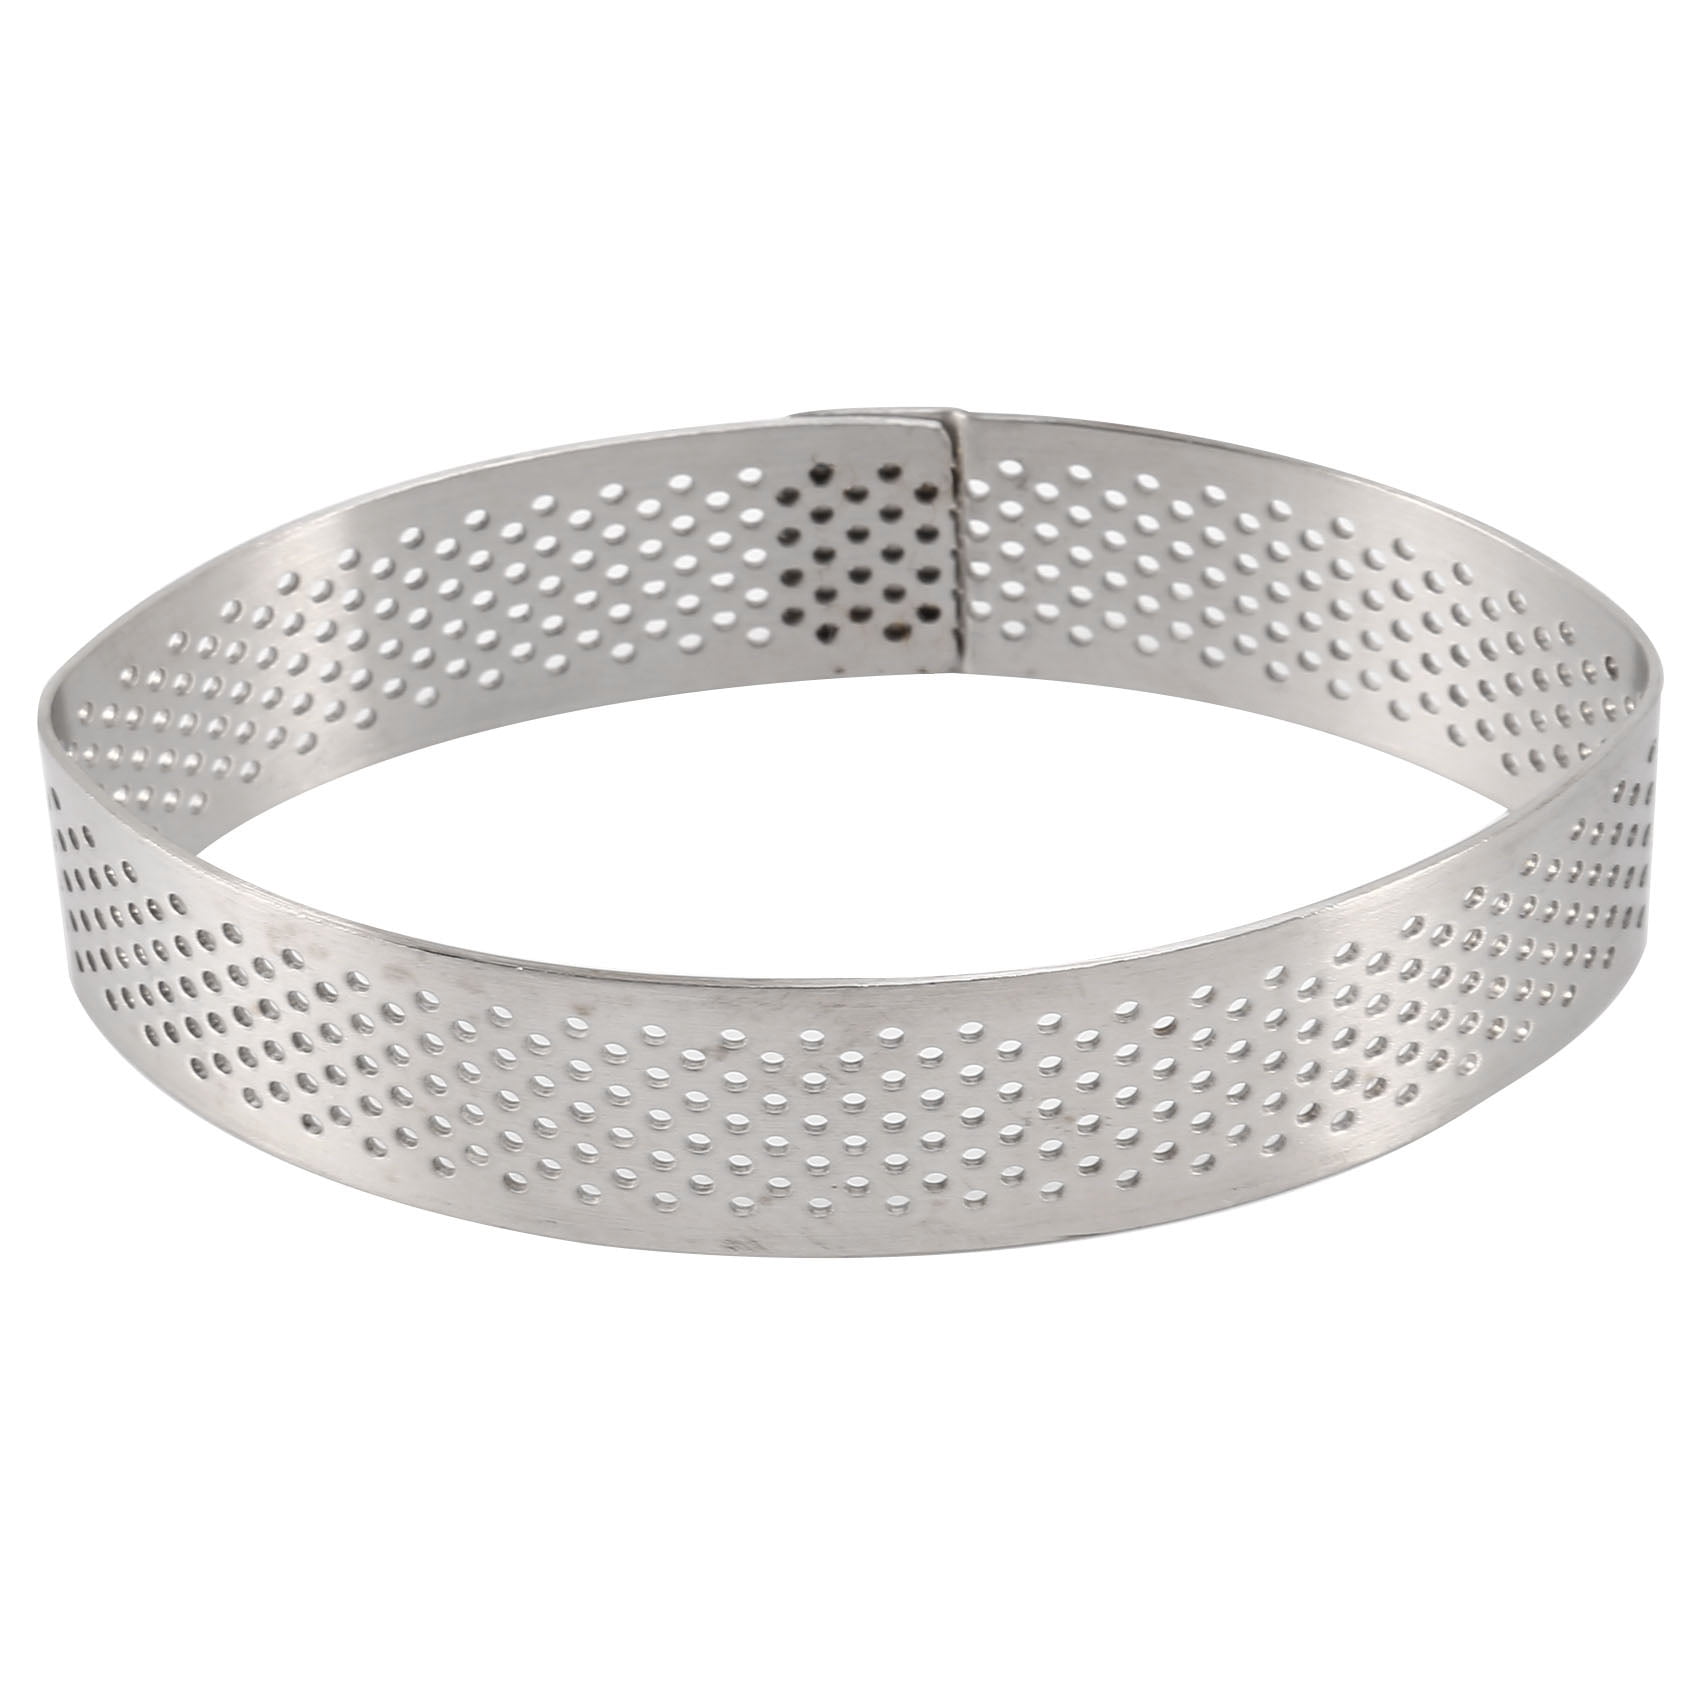 10 Pack Stainless Steel Tart Ring, Heat-Resistant Perforated Cake ...